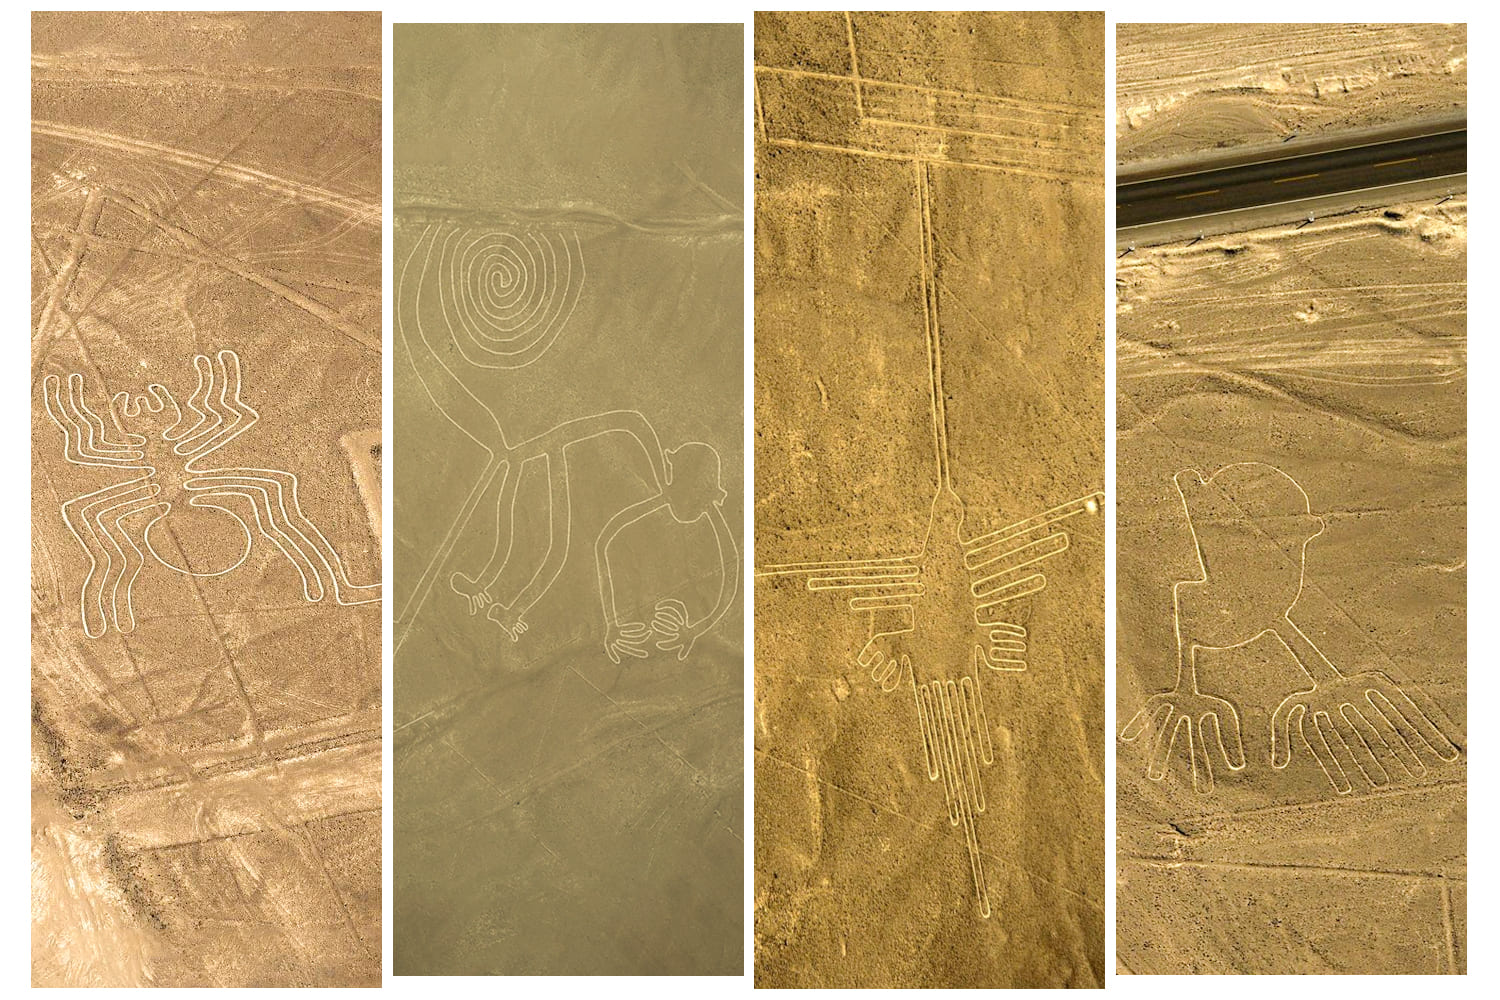 Fly over the Nazca lines